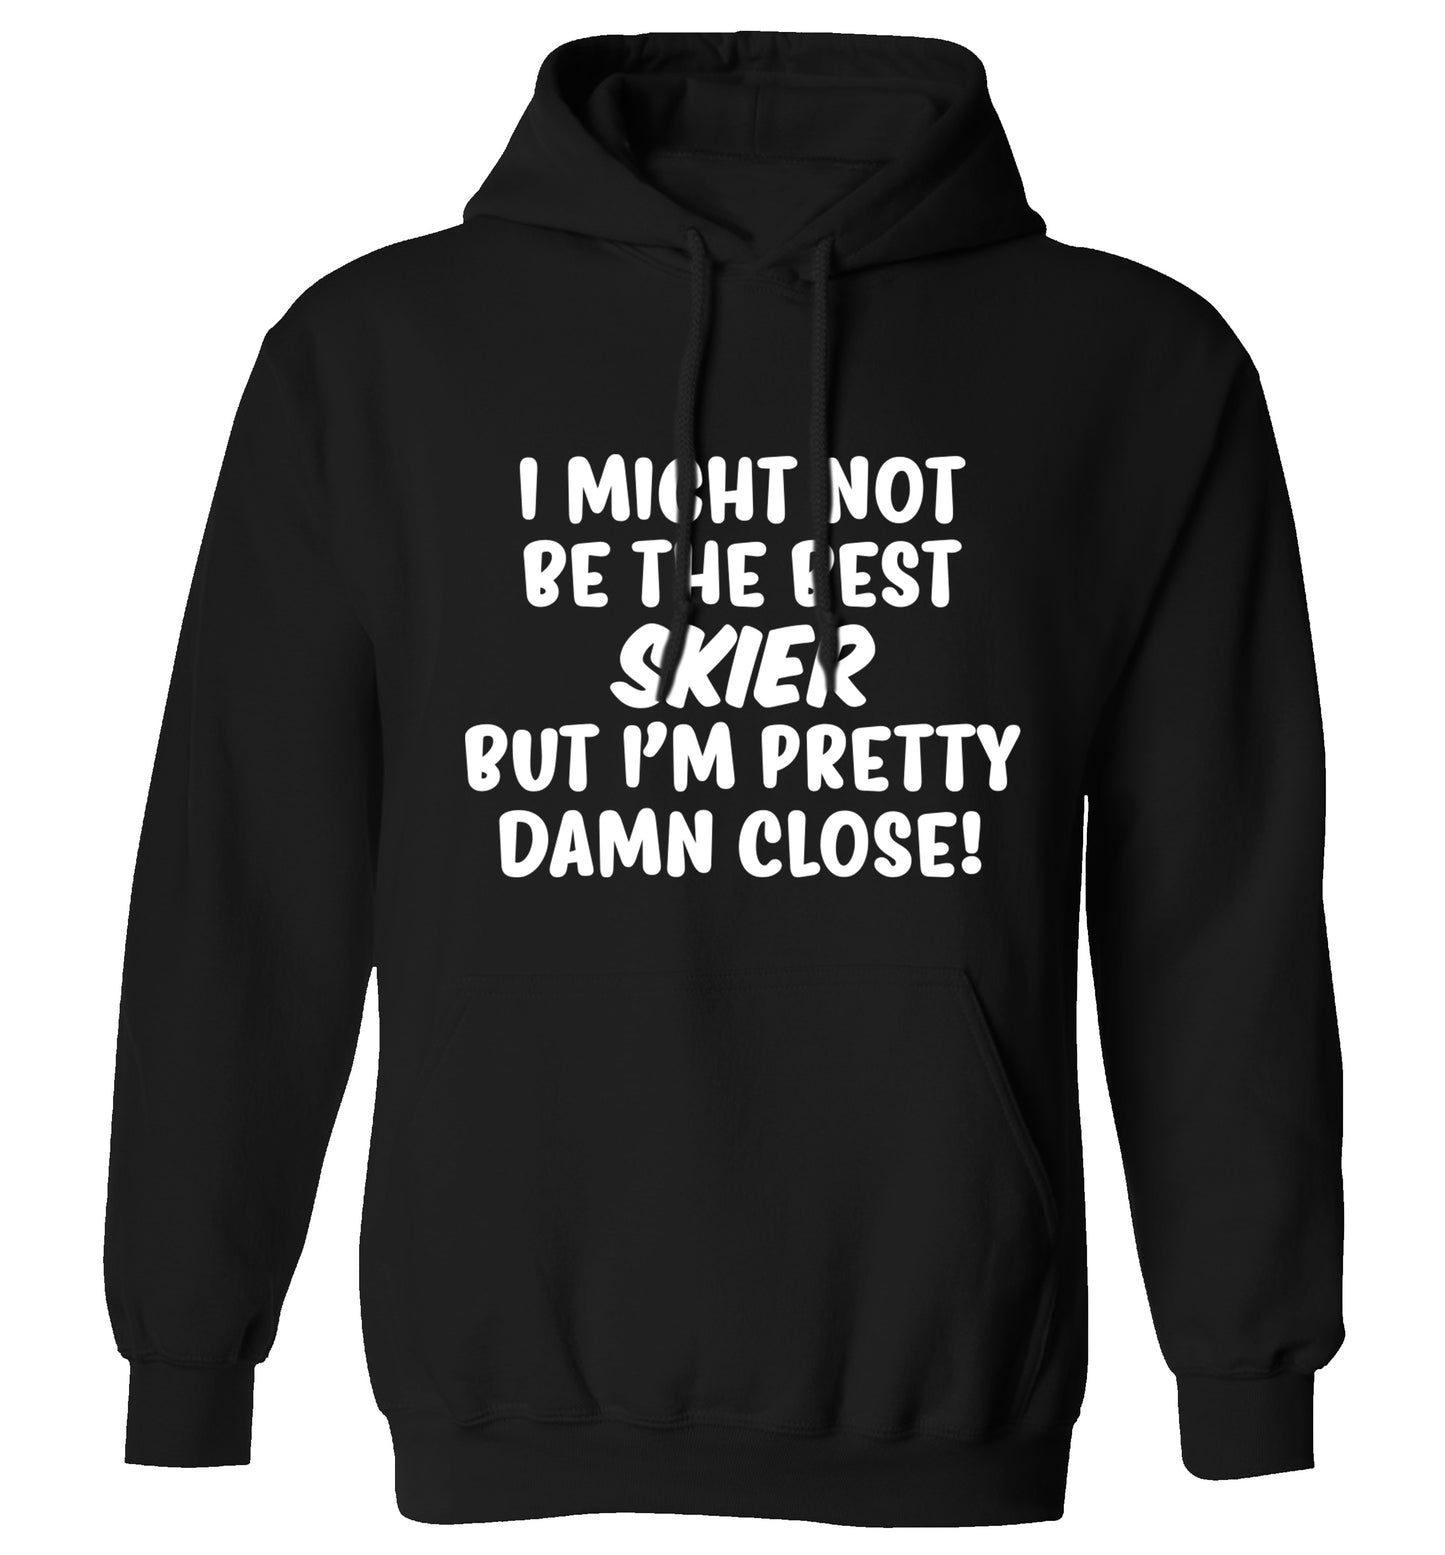 I might not be the best skier but I'm pretty damn close! adults unisexblack hoodie 2XL